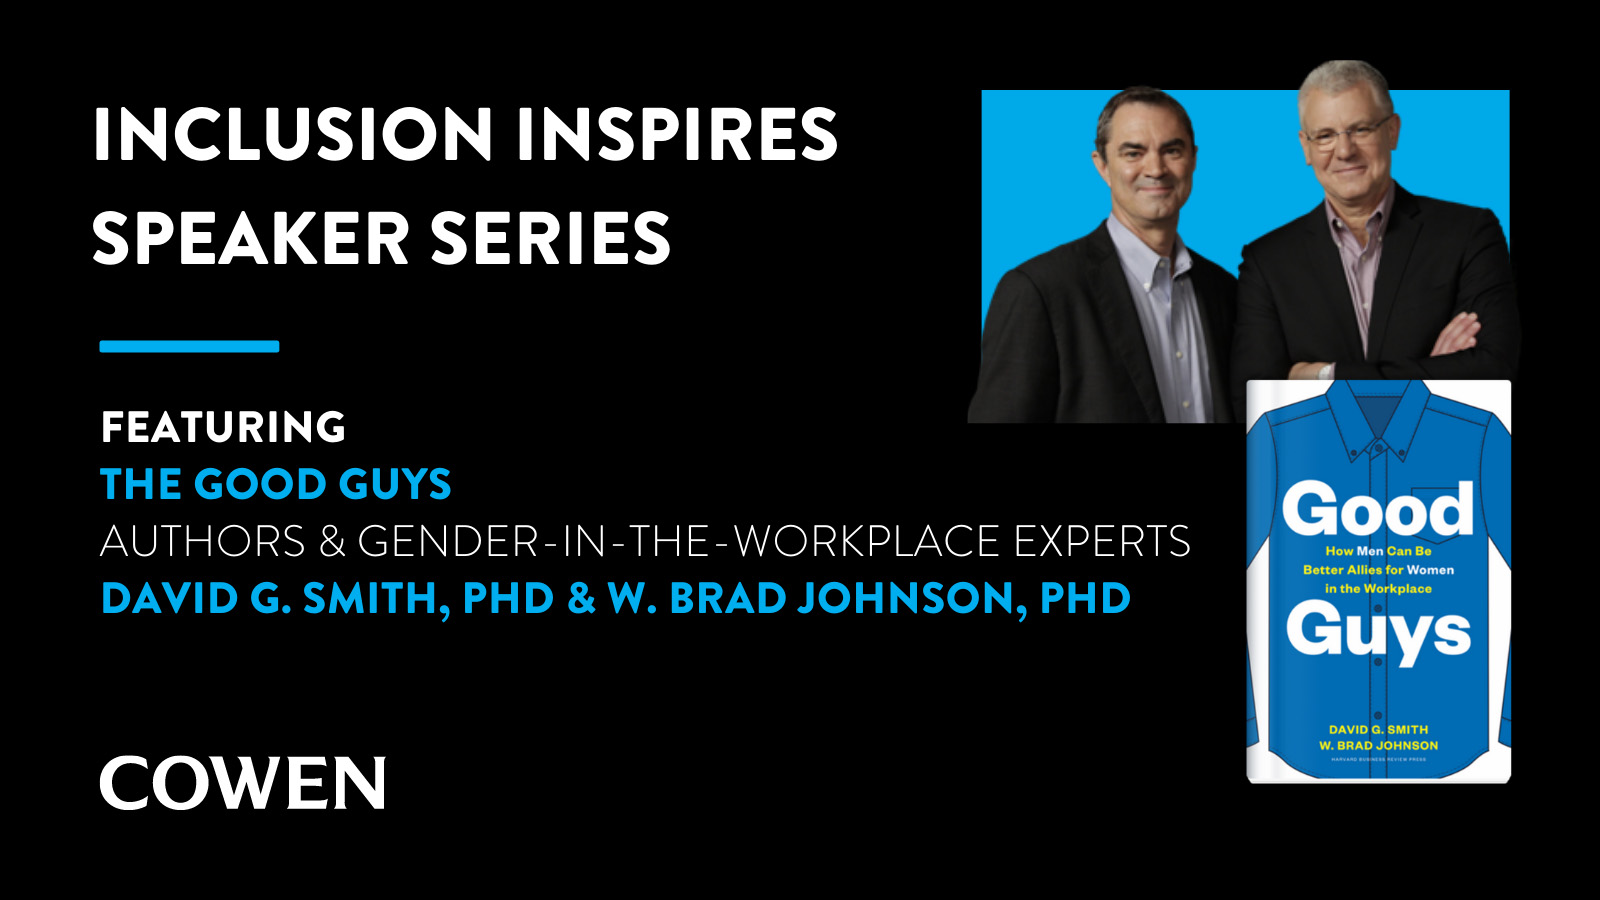 Inclusion Inspires Speaker Series - Featuring: The Good Guys - Authors & gender in the workplace experts David G. Smith, PhD & W. Brad Johnson, PhD